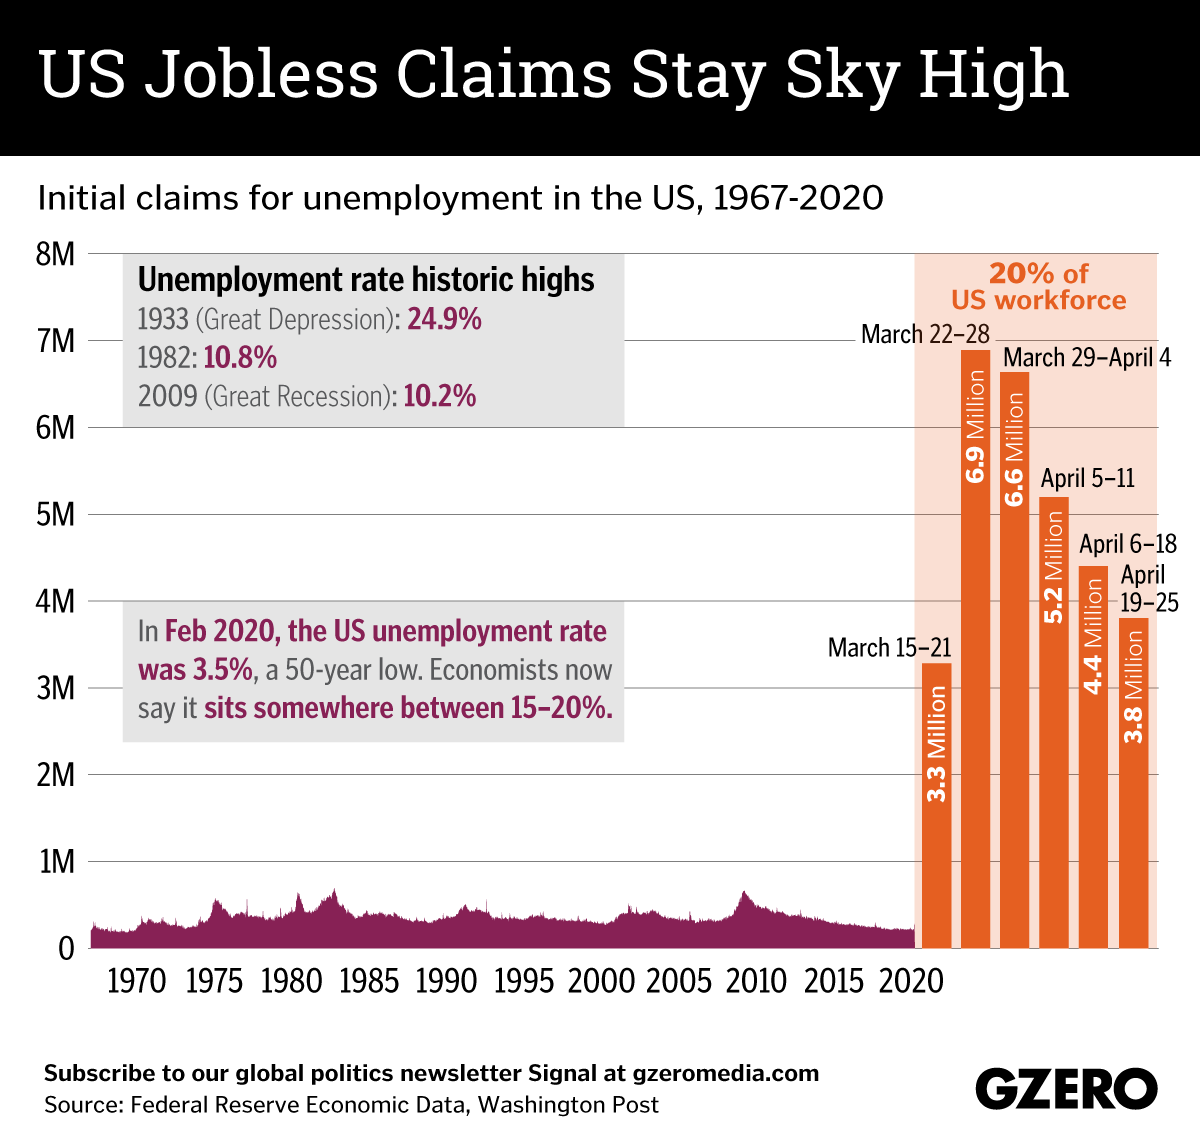 The Graphic Truth: US jobless claims stay sky high